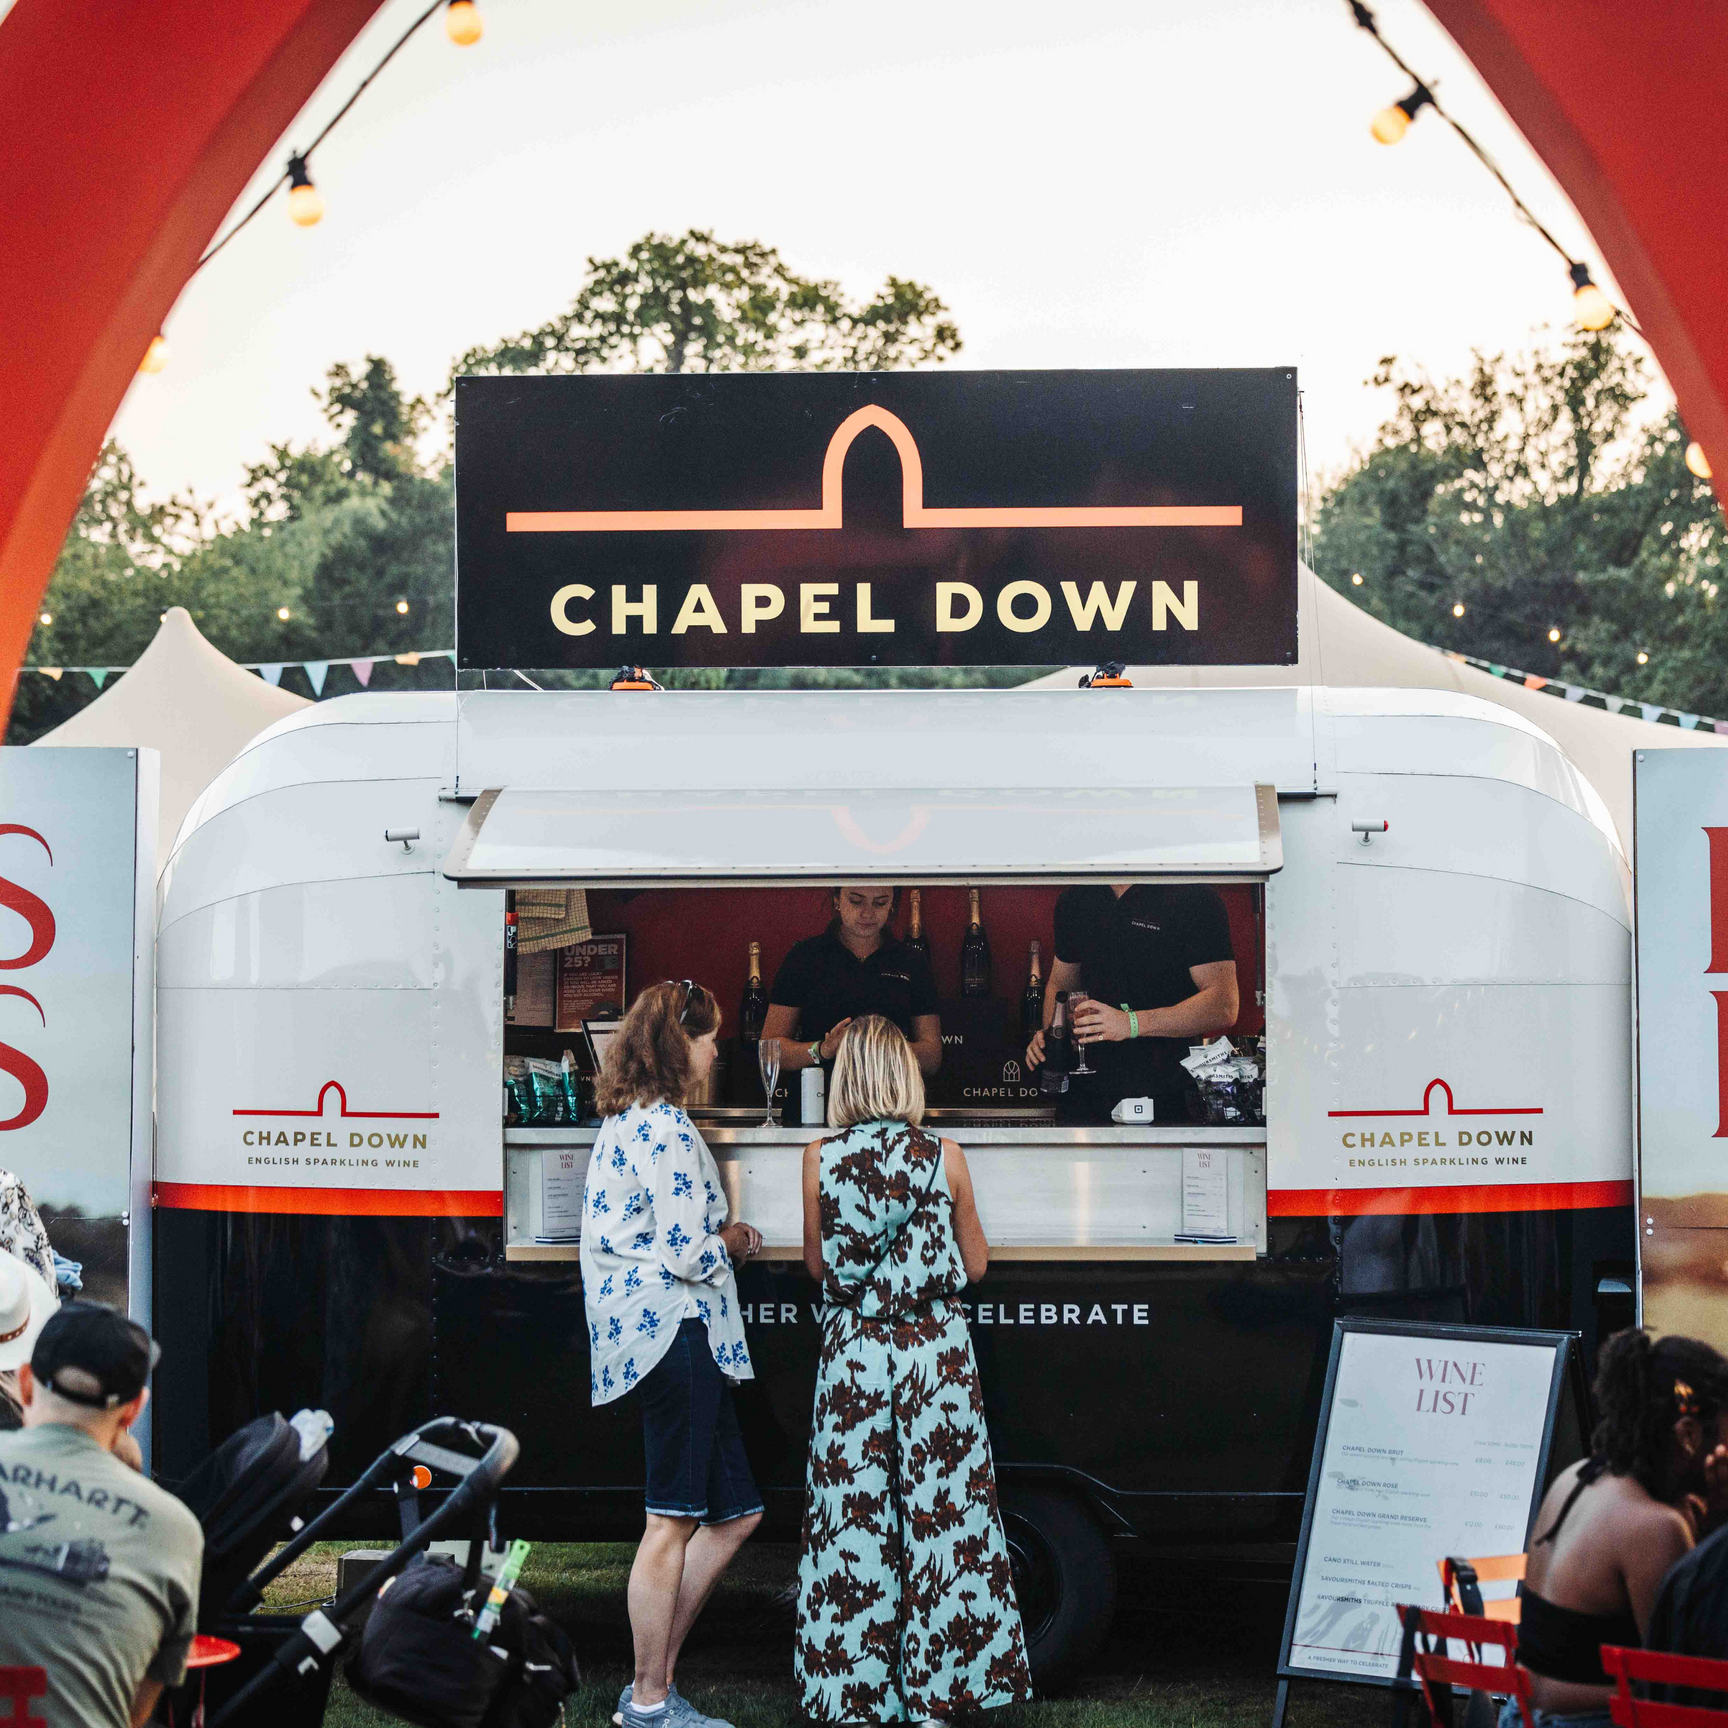 CHAPEL DOWN TO SHOWCASE ENGLISH SPARKLING WINE AT FOODIES FESTIVAL